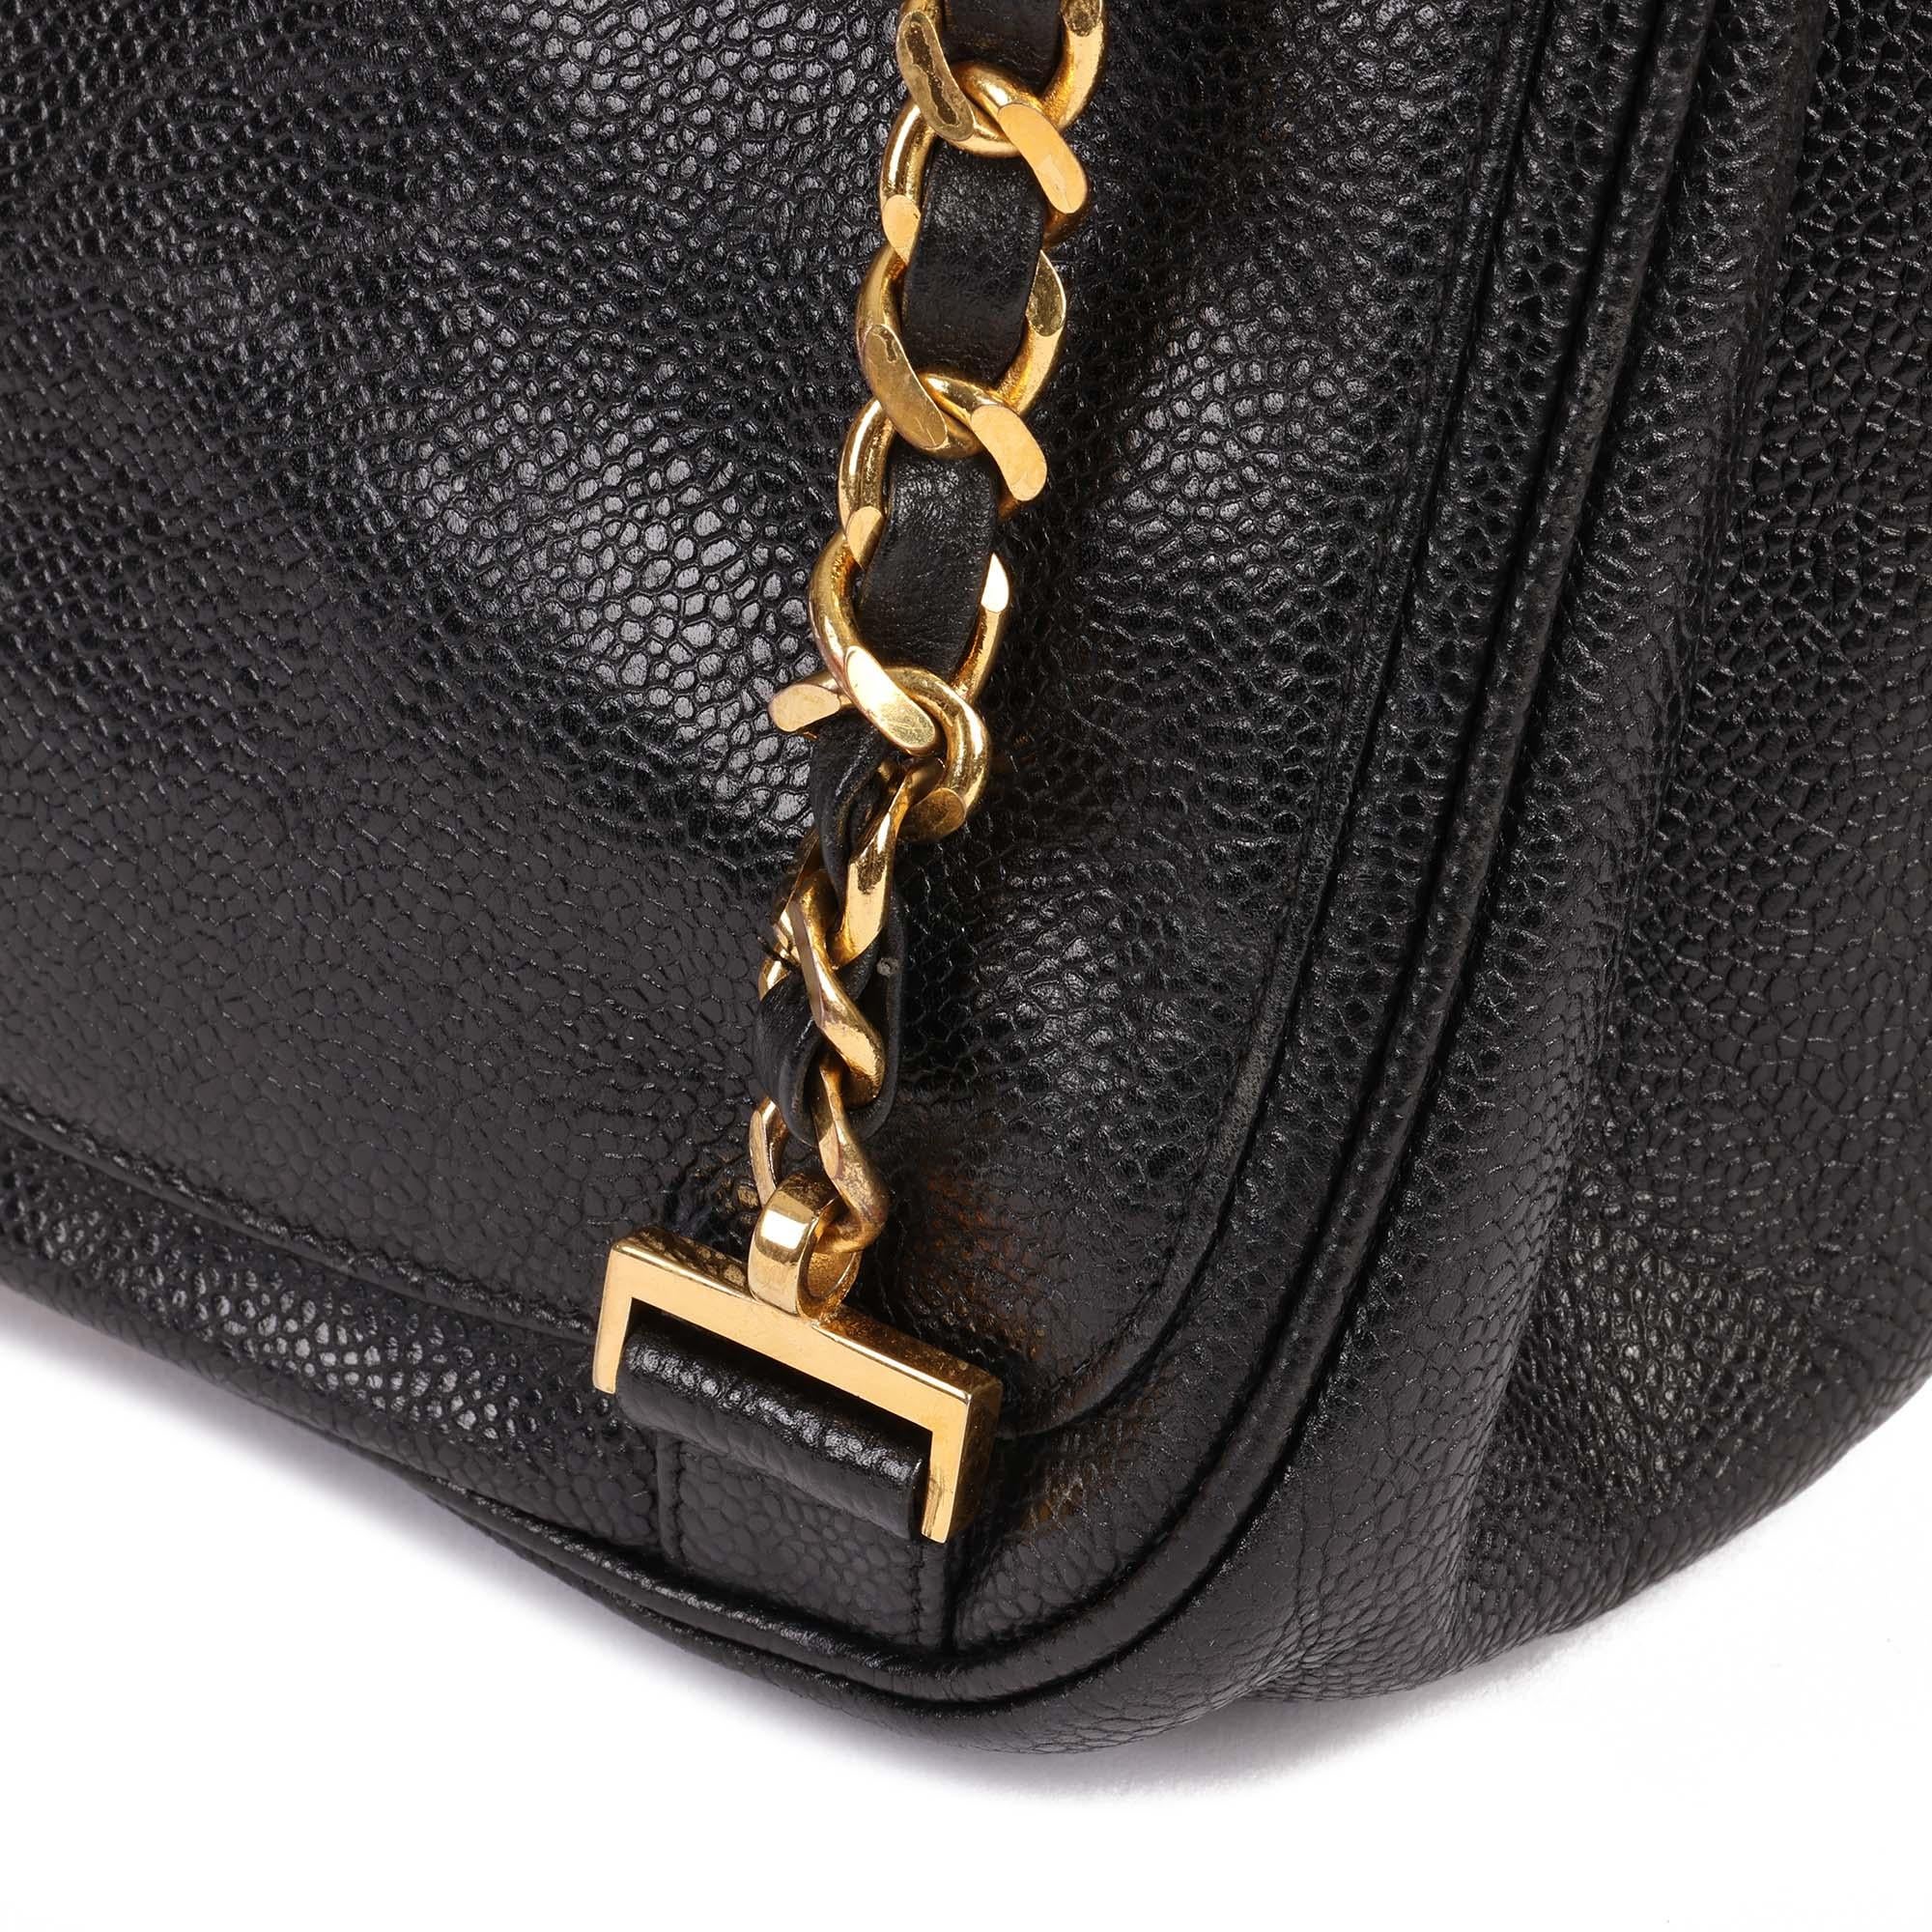 CHANEL Black Caviar Leather Vintage Classic Backpack 2